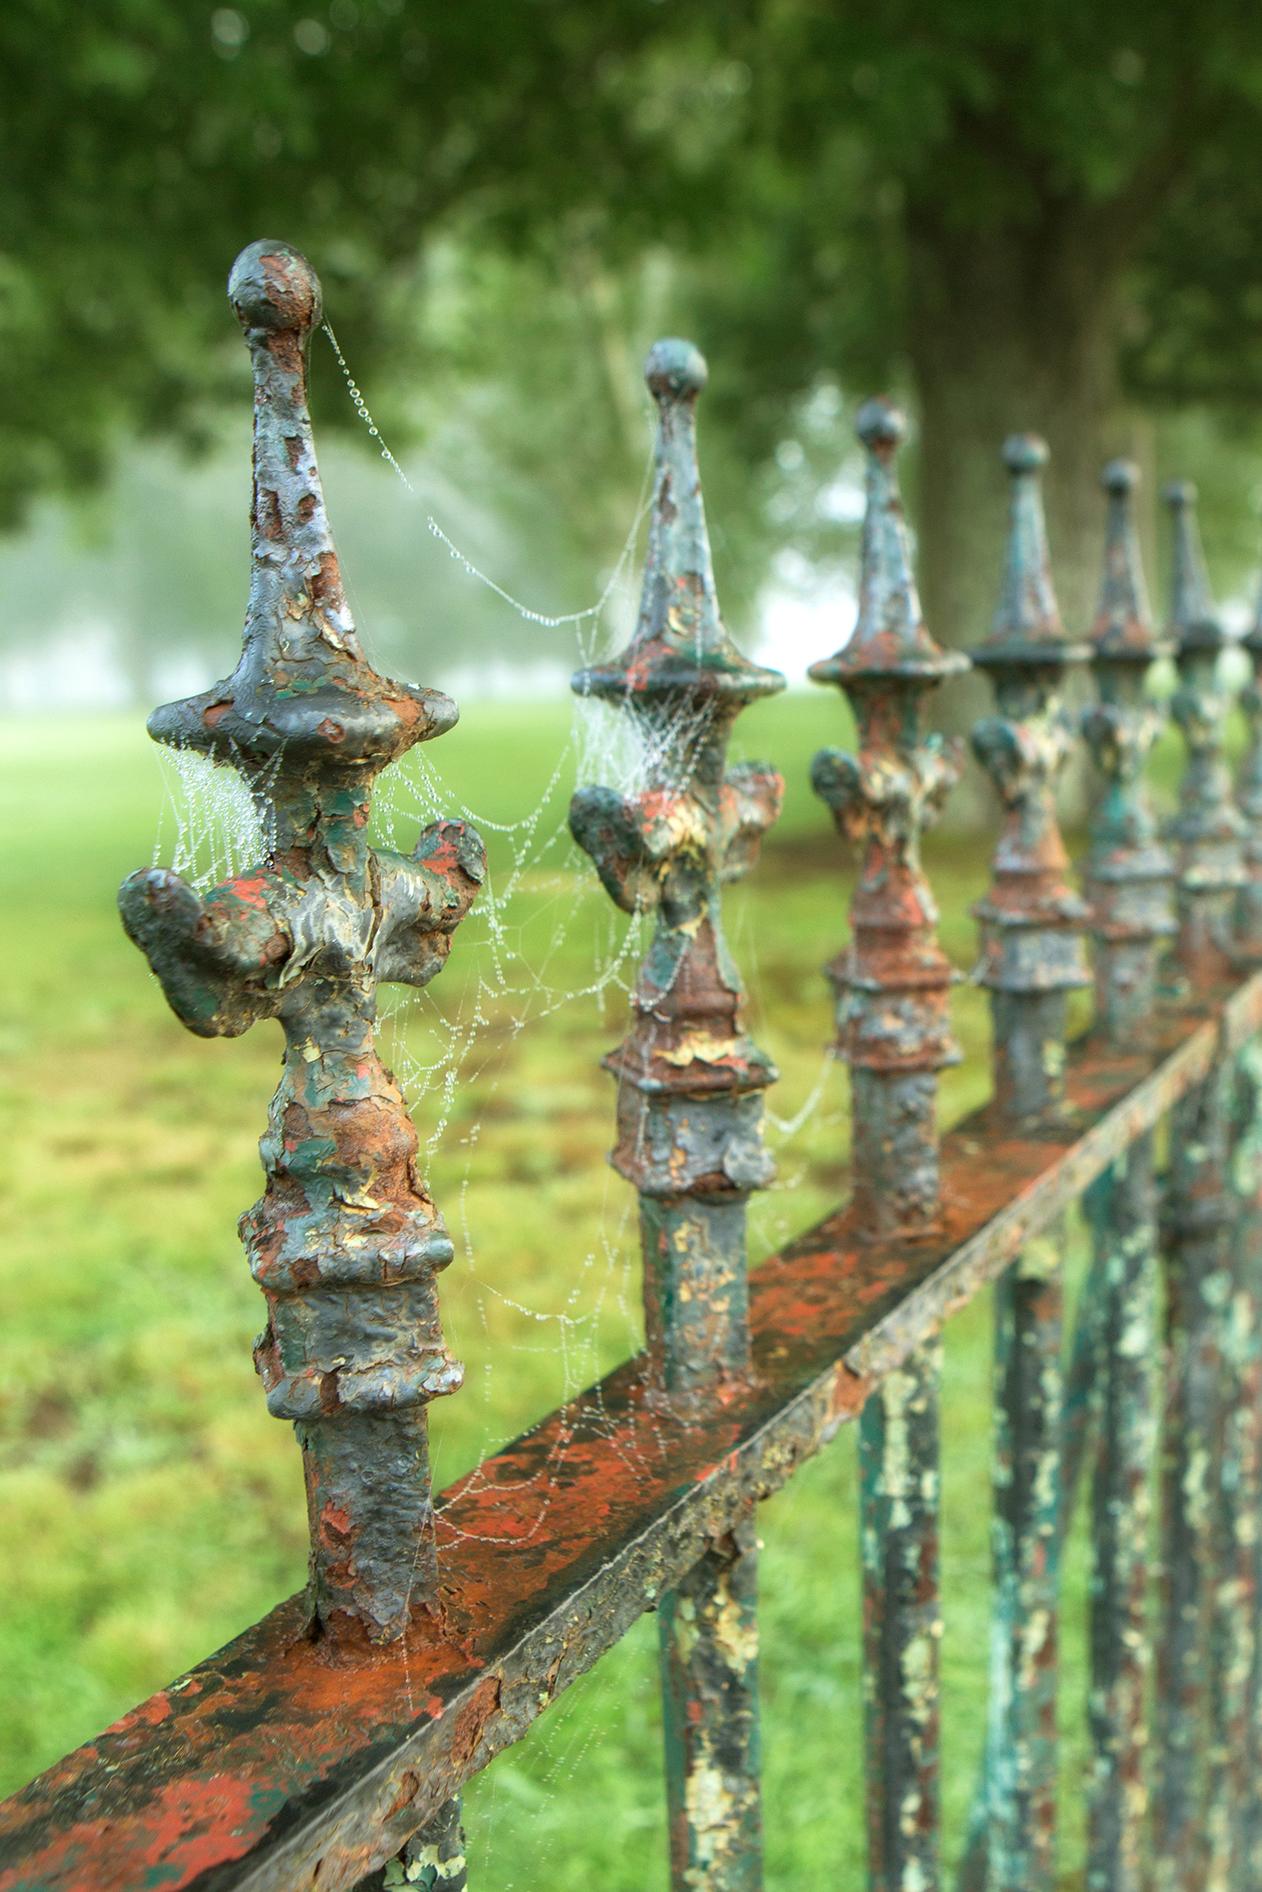 Rebecca Skinner’s “Iron” is a 24 x 16 inch metal print of a wrought iron fence. The color photograph has a satin finish and is infused directly into metal making it waterproof and easy to clean. The frameless print hangs easily with a float mount